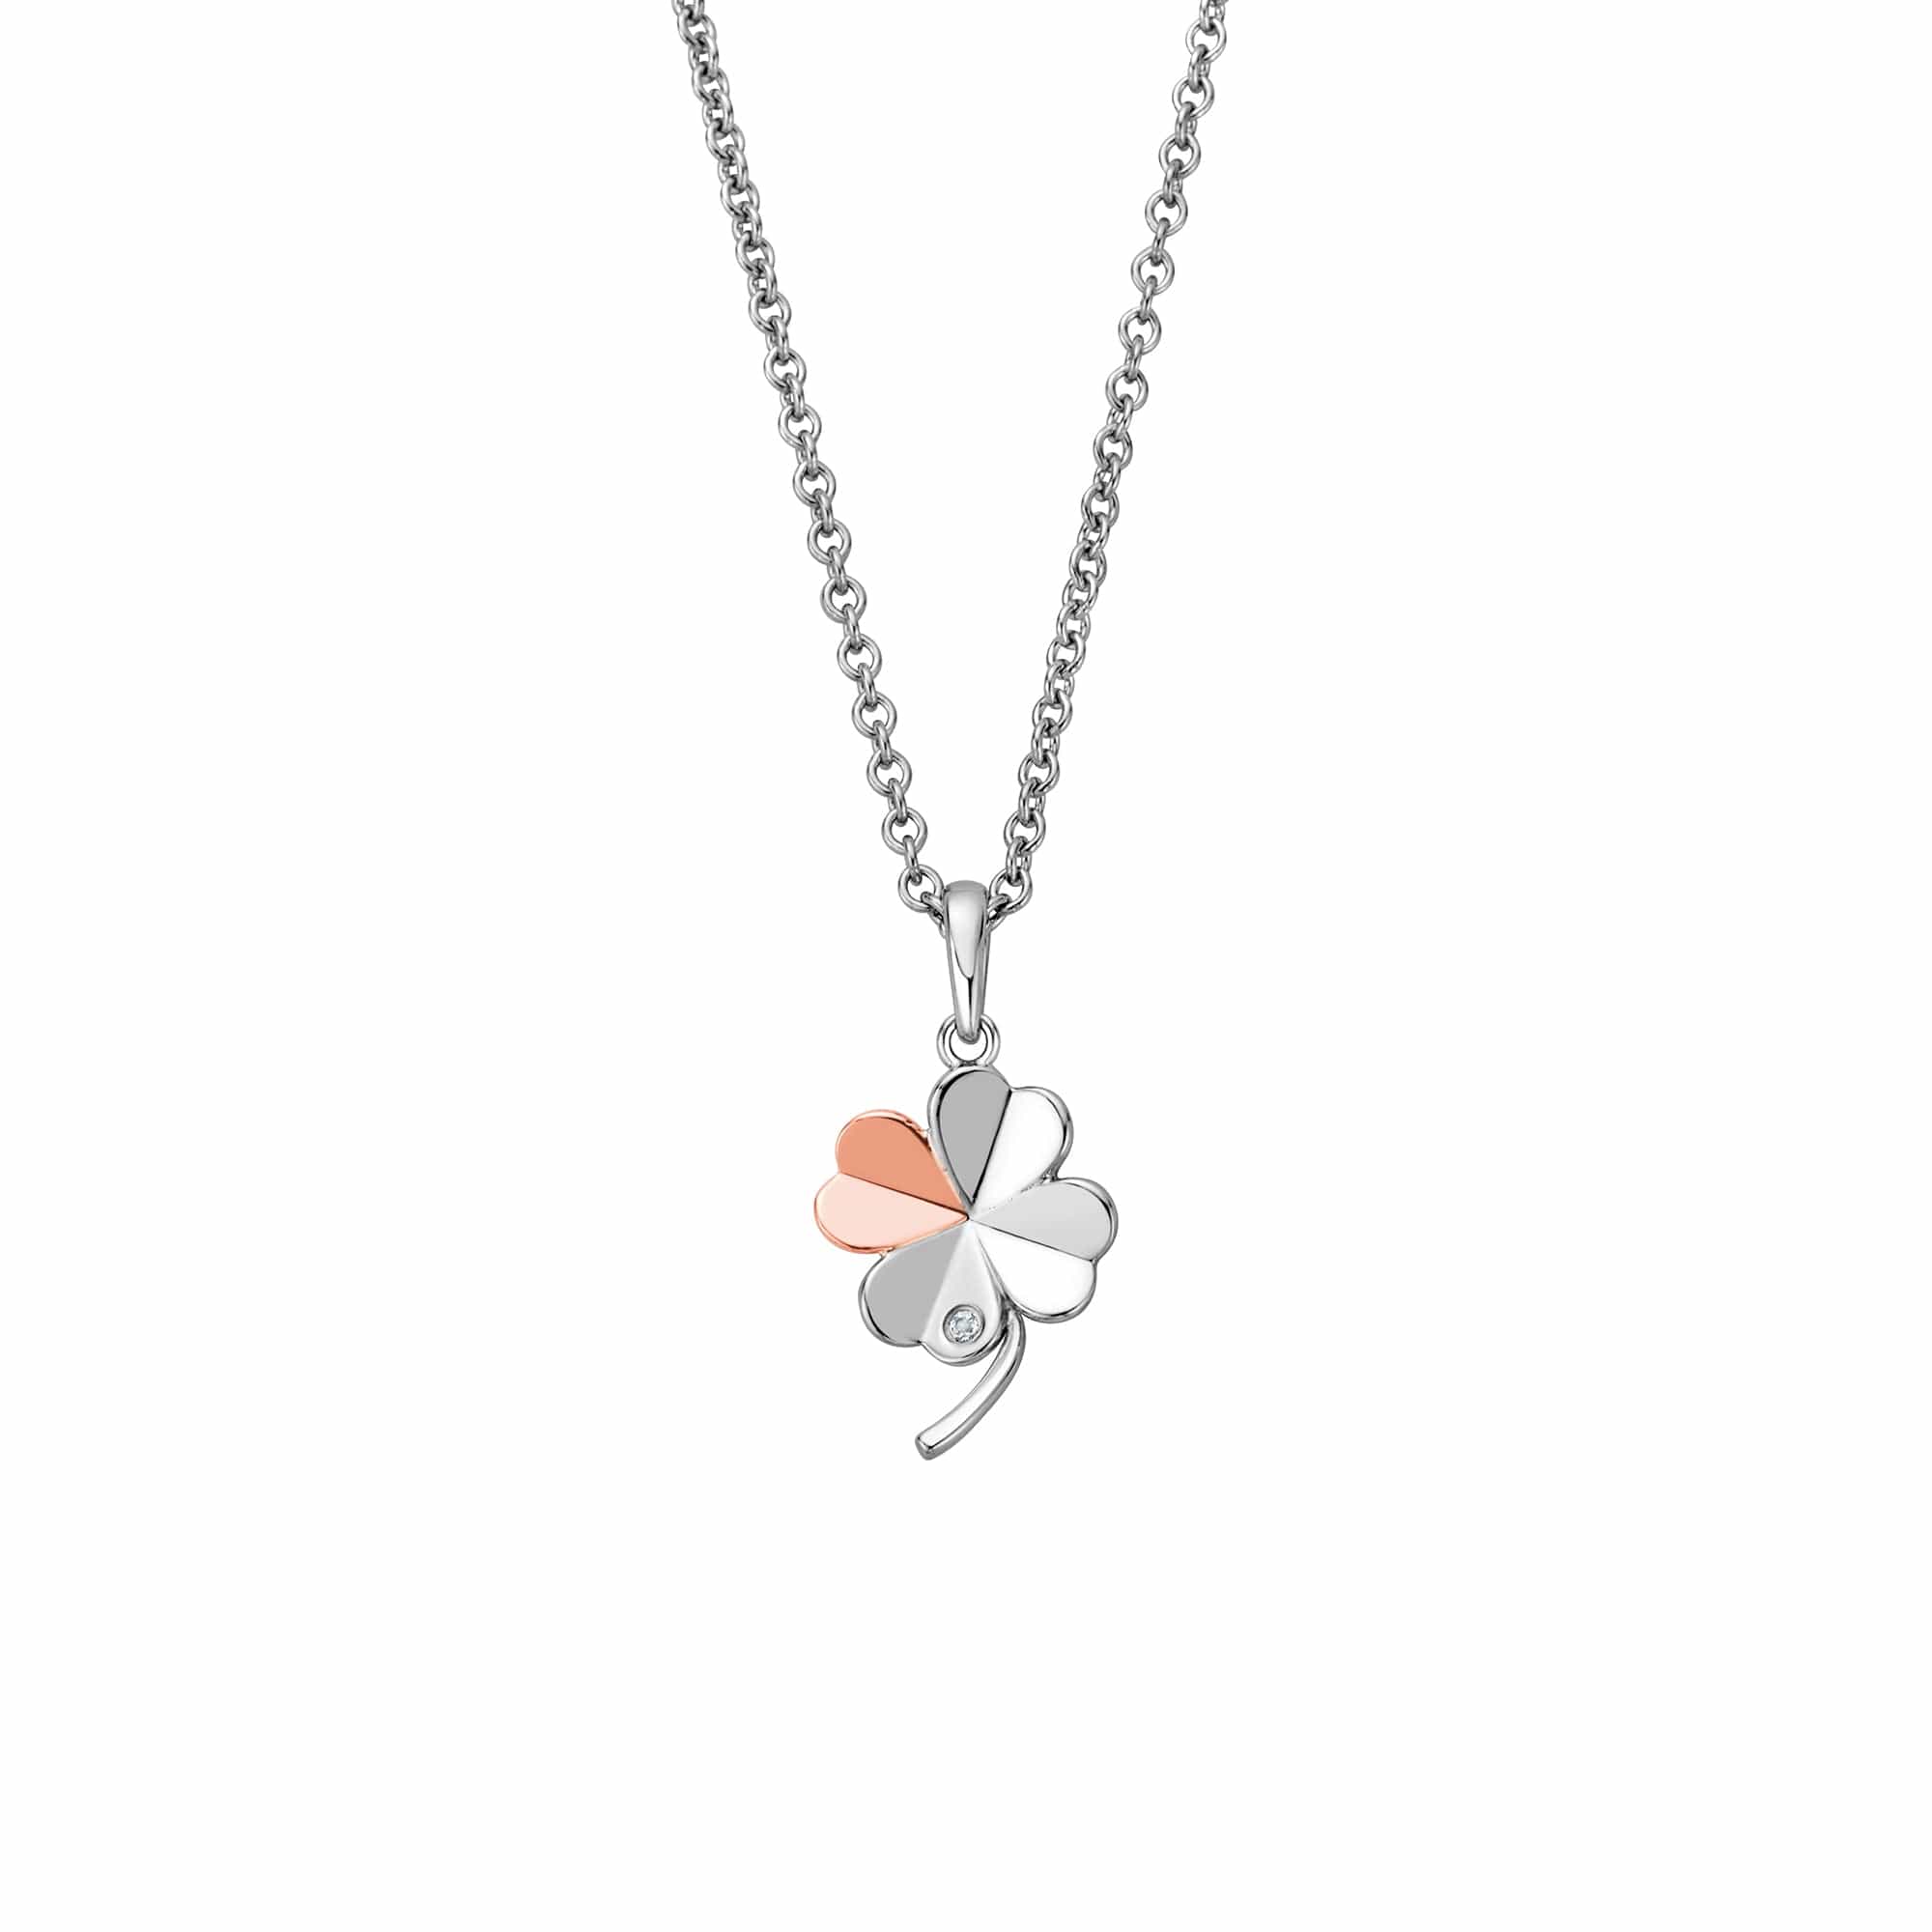 Clogau© Welsh Gold Jewellery | Browse our new collection